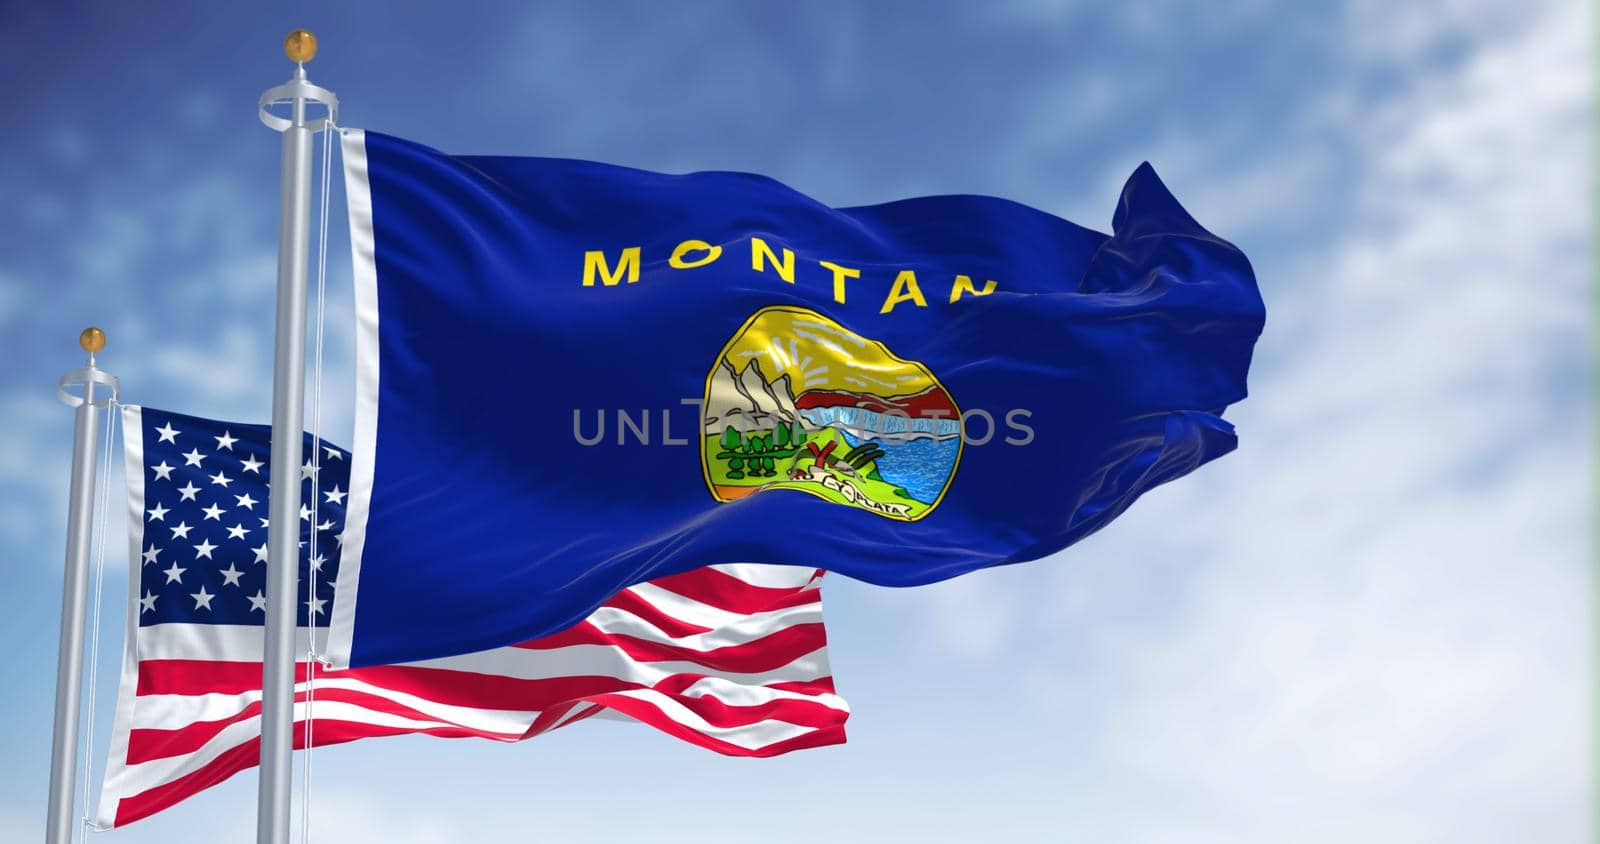 The Montana state flag waving along with the national flag of the United States of America by rarrarorro